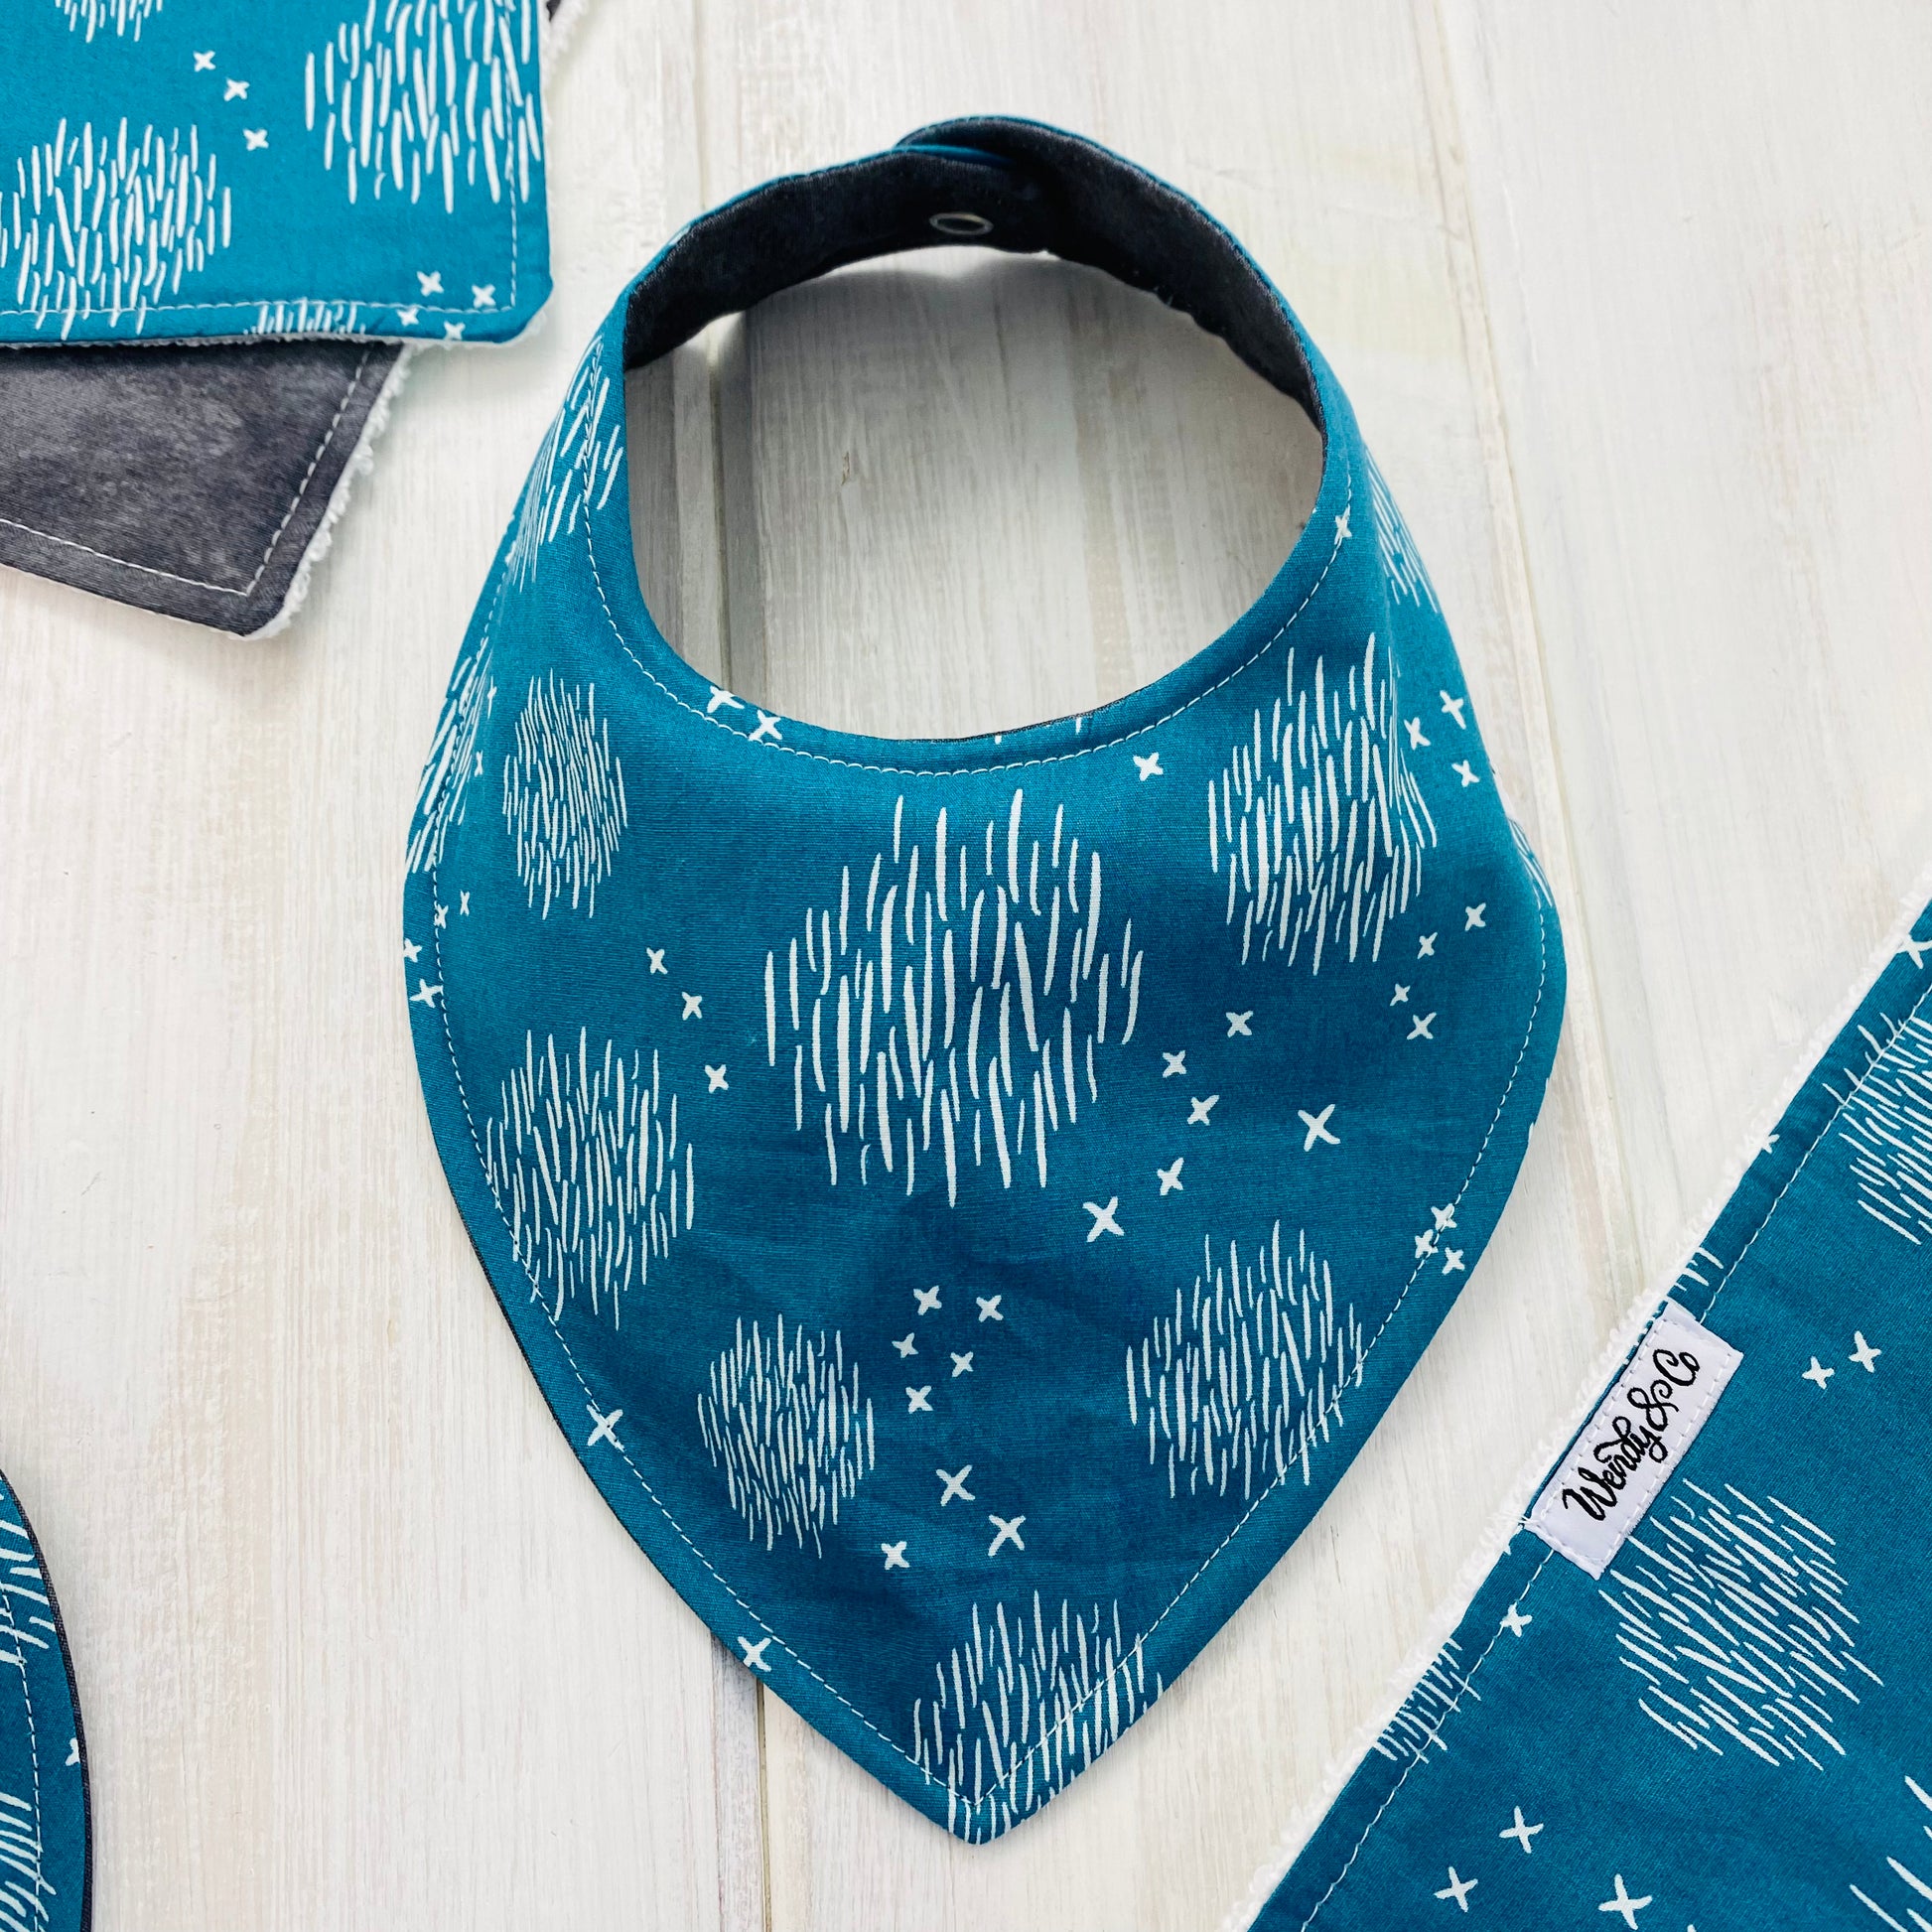 Neutral baby bib in teal cross and hatch print fabric.